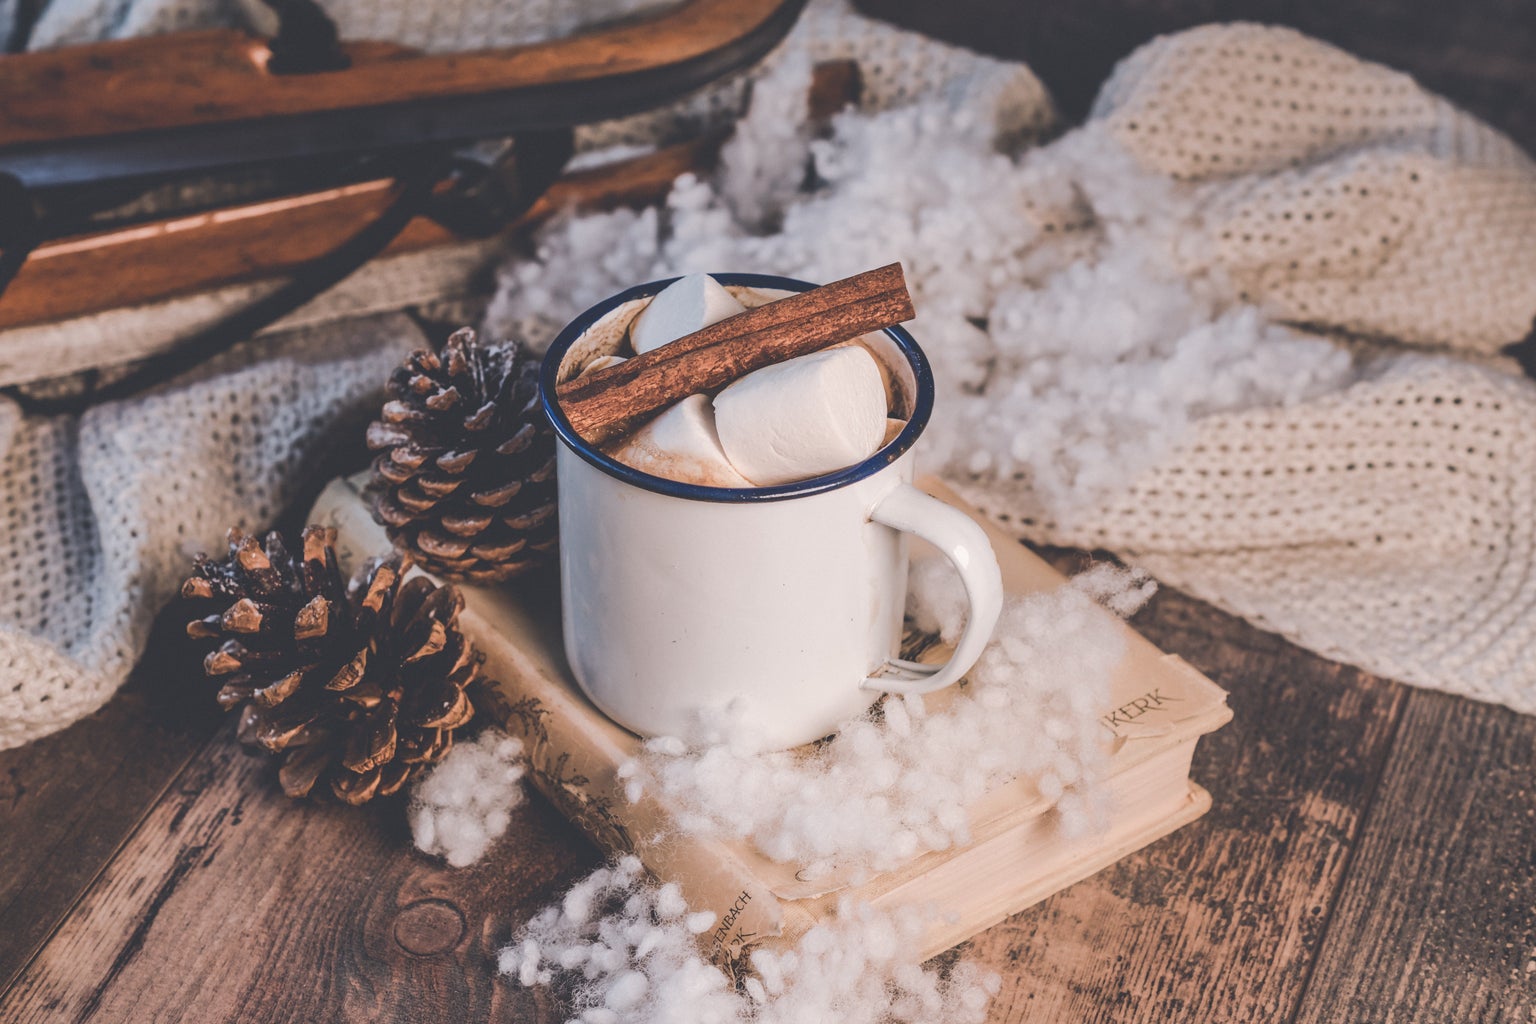 hot cocoa surrounded by a white blanket, white fluff, cinnamon sticks, and pinecones